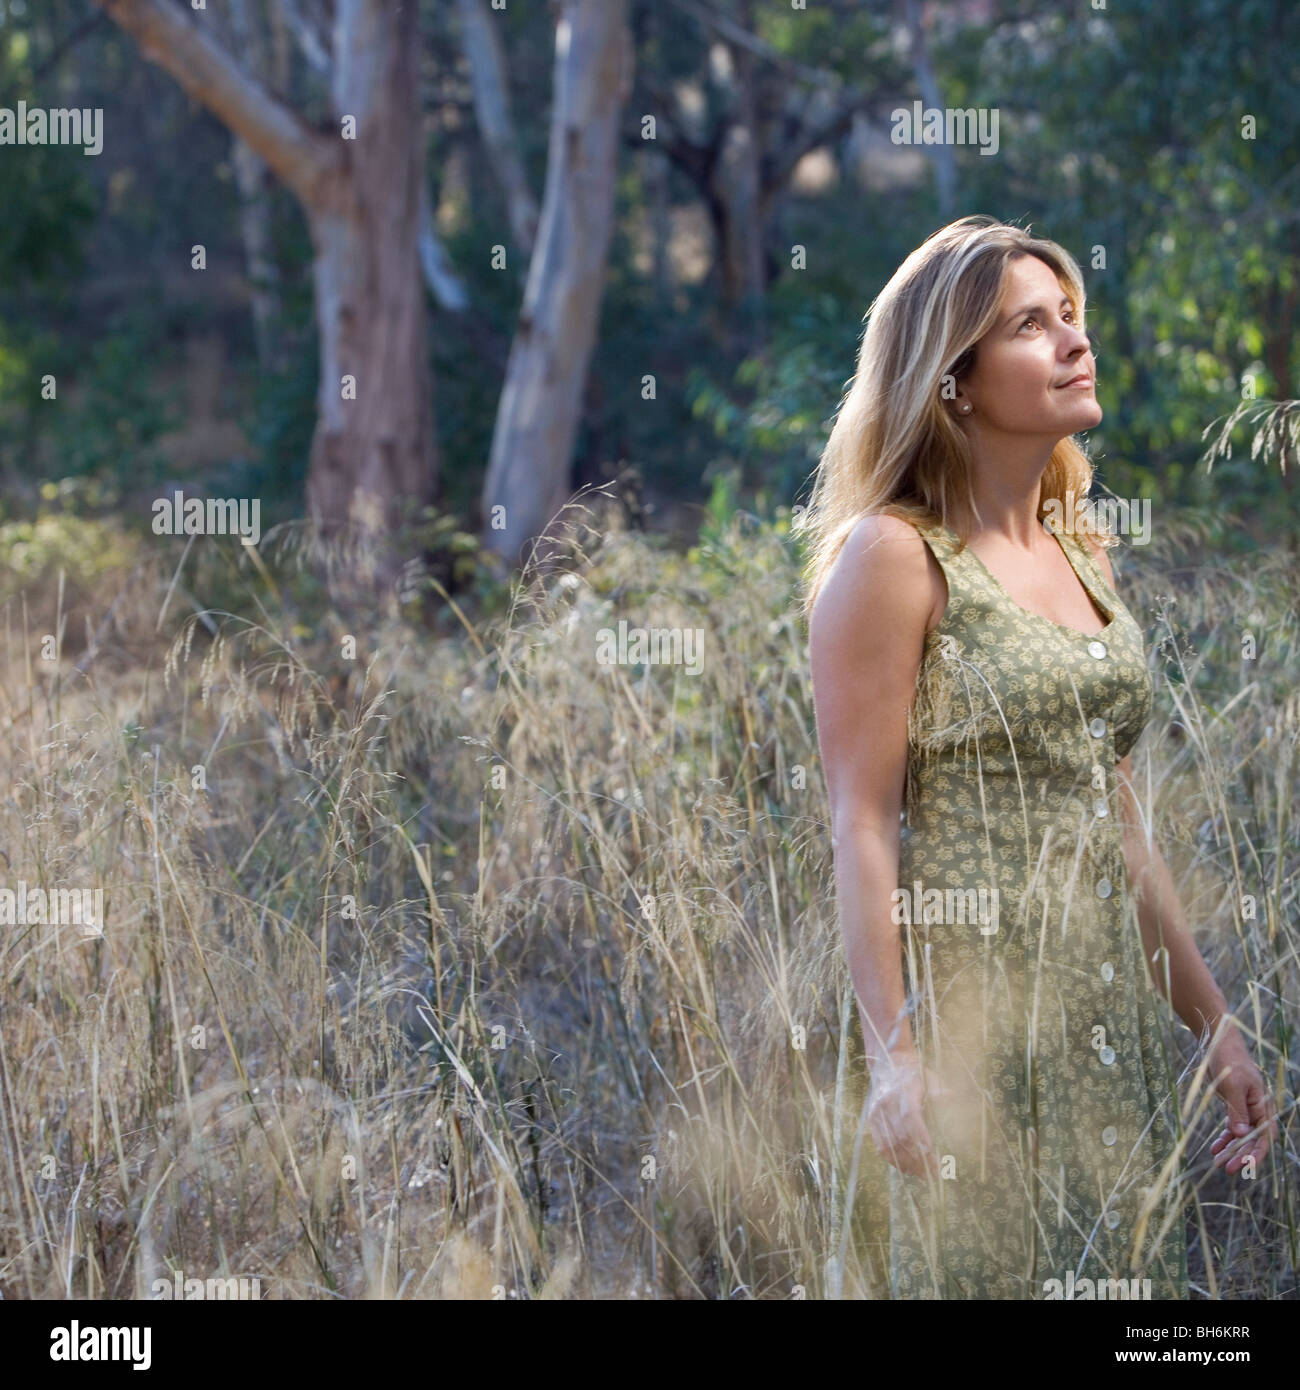 Smiling woman standing in a field Banque D'Images